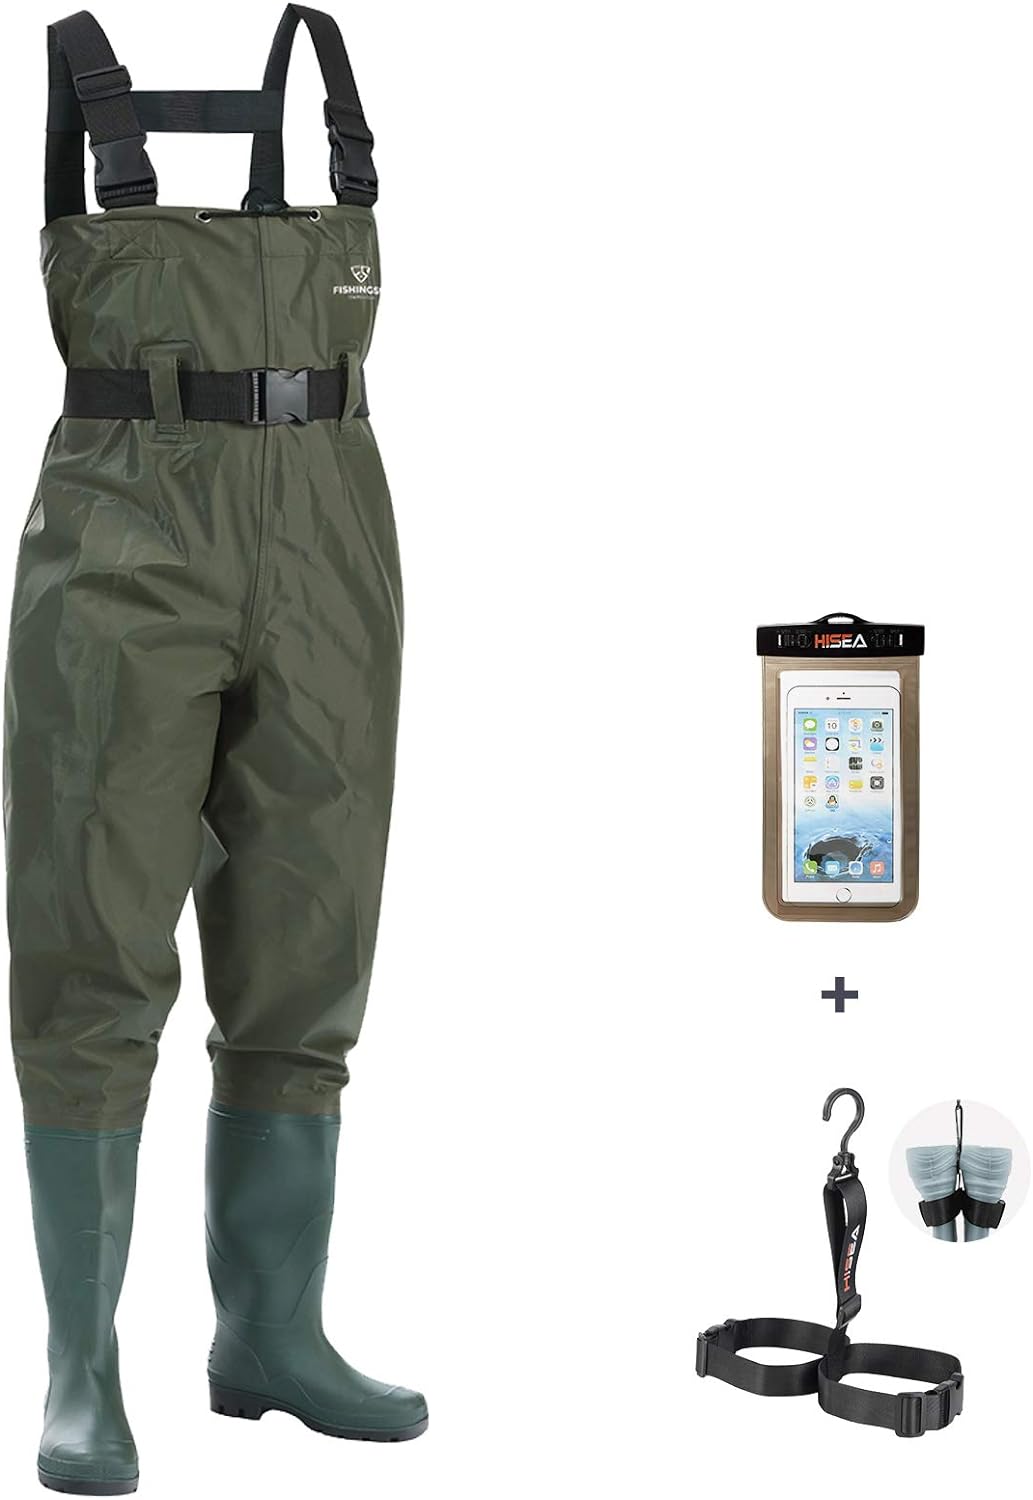 BELLE DURA Fishing Waders Waterproof Lightweight with Boots Nylon Pants PVC Boots Chest Waders for Men Women